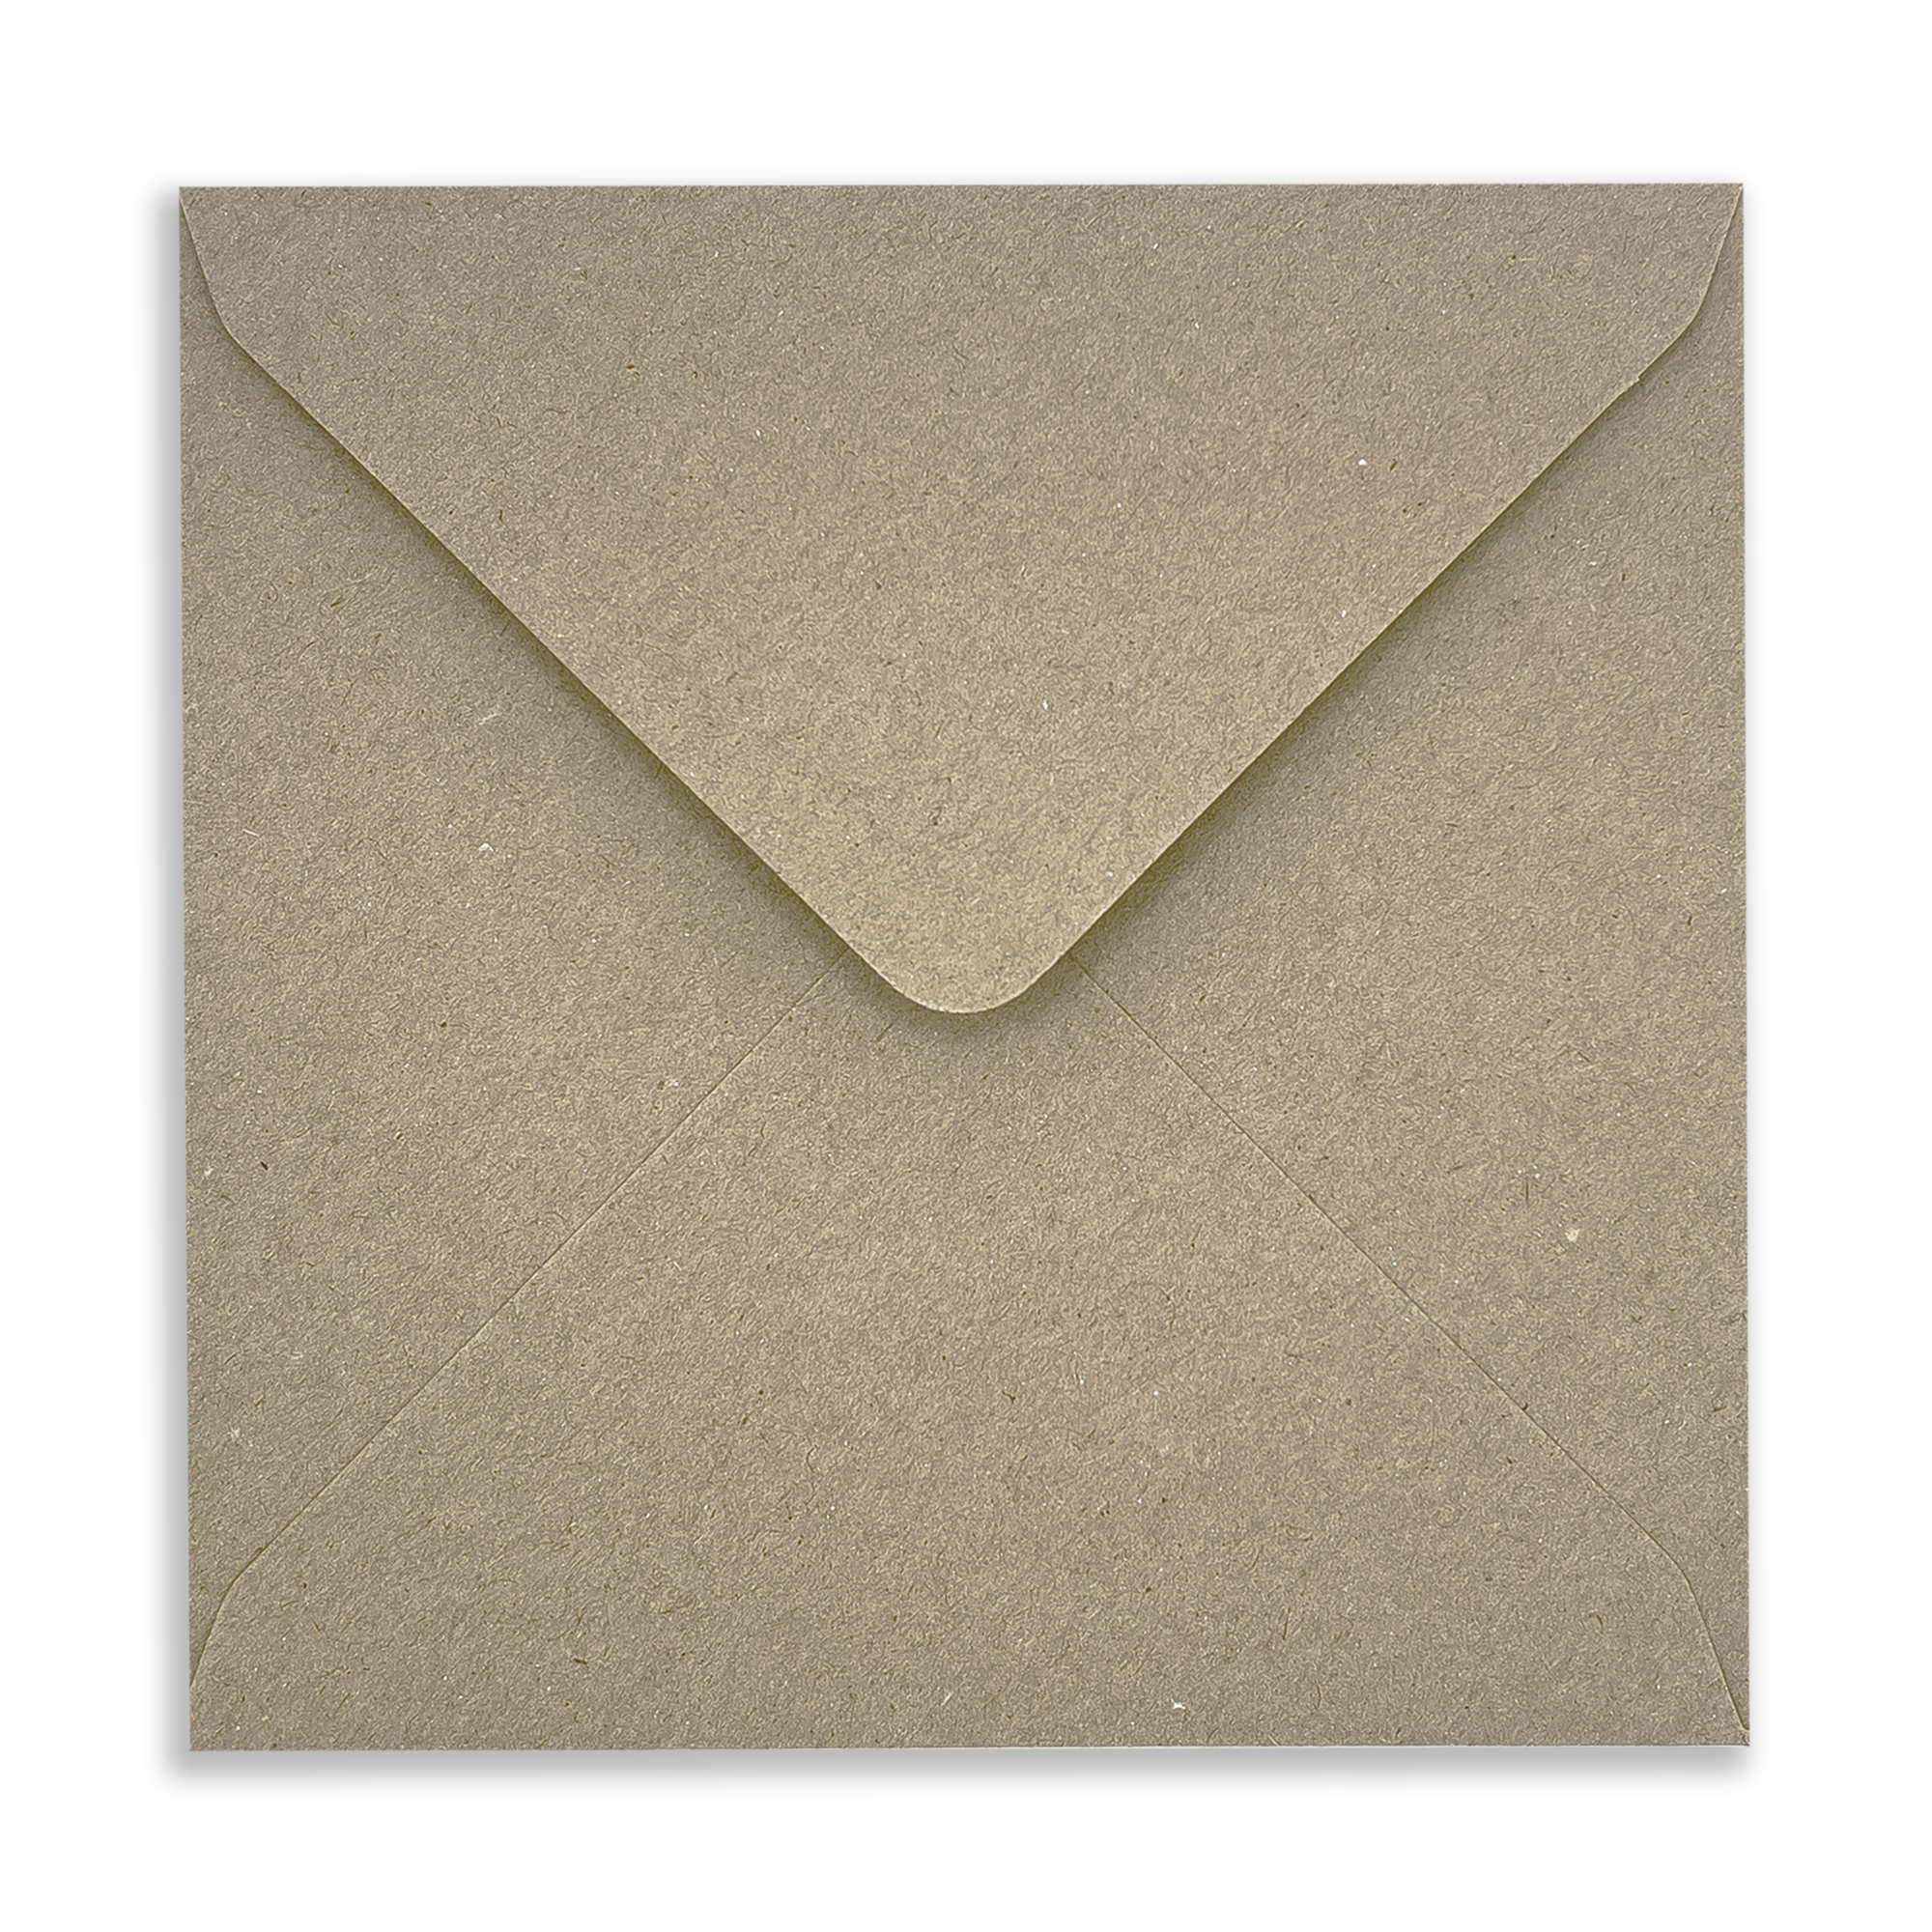 155mmSQRecycledFleckEnvelope_Front